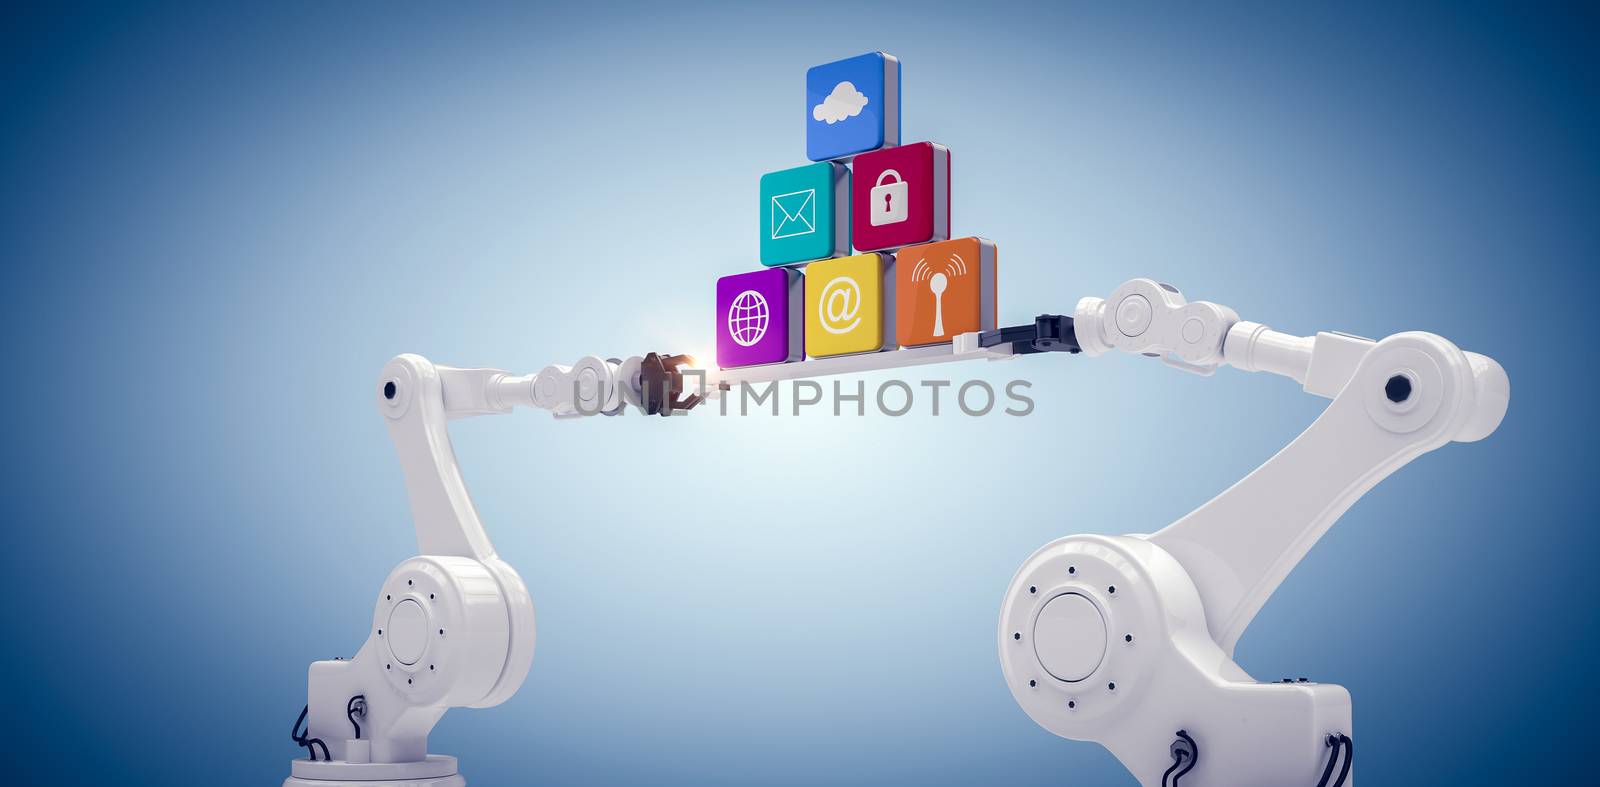 obotic hands holding computer icons on white background against blue vignette